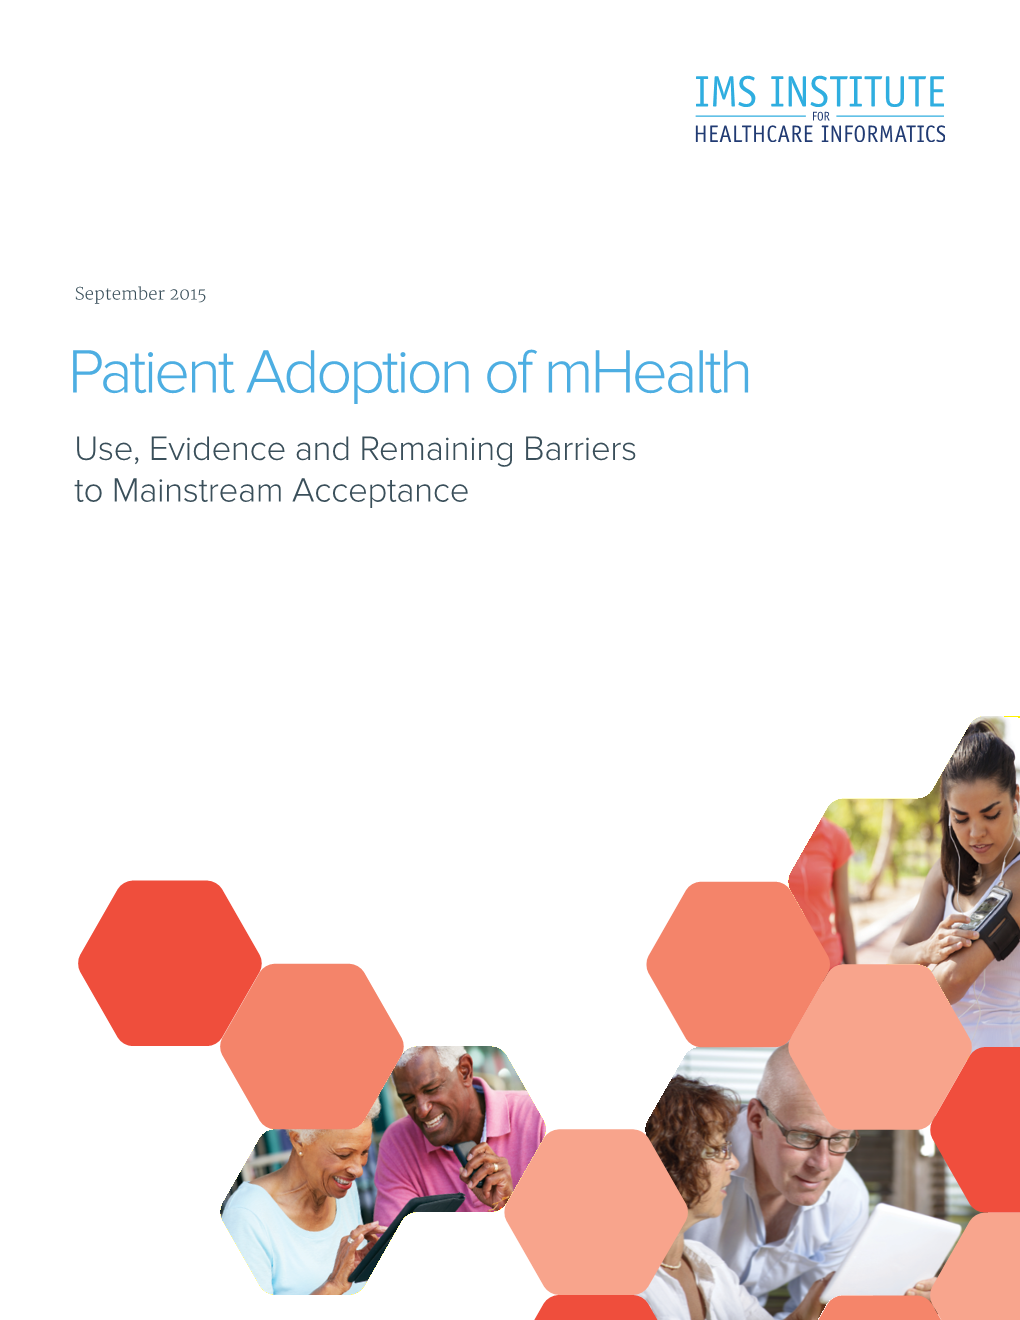 Patient Adoption of Mhealth Use, Evidence and Remaining Barriers to Mainstream Acceptance Introduction